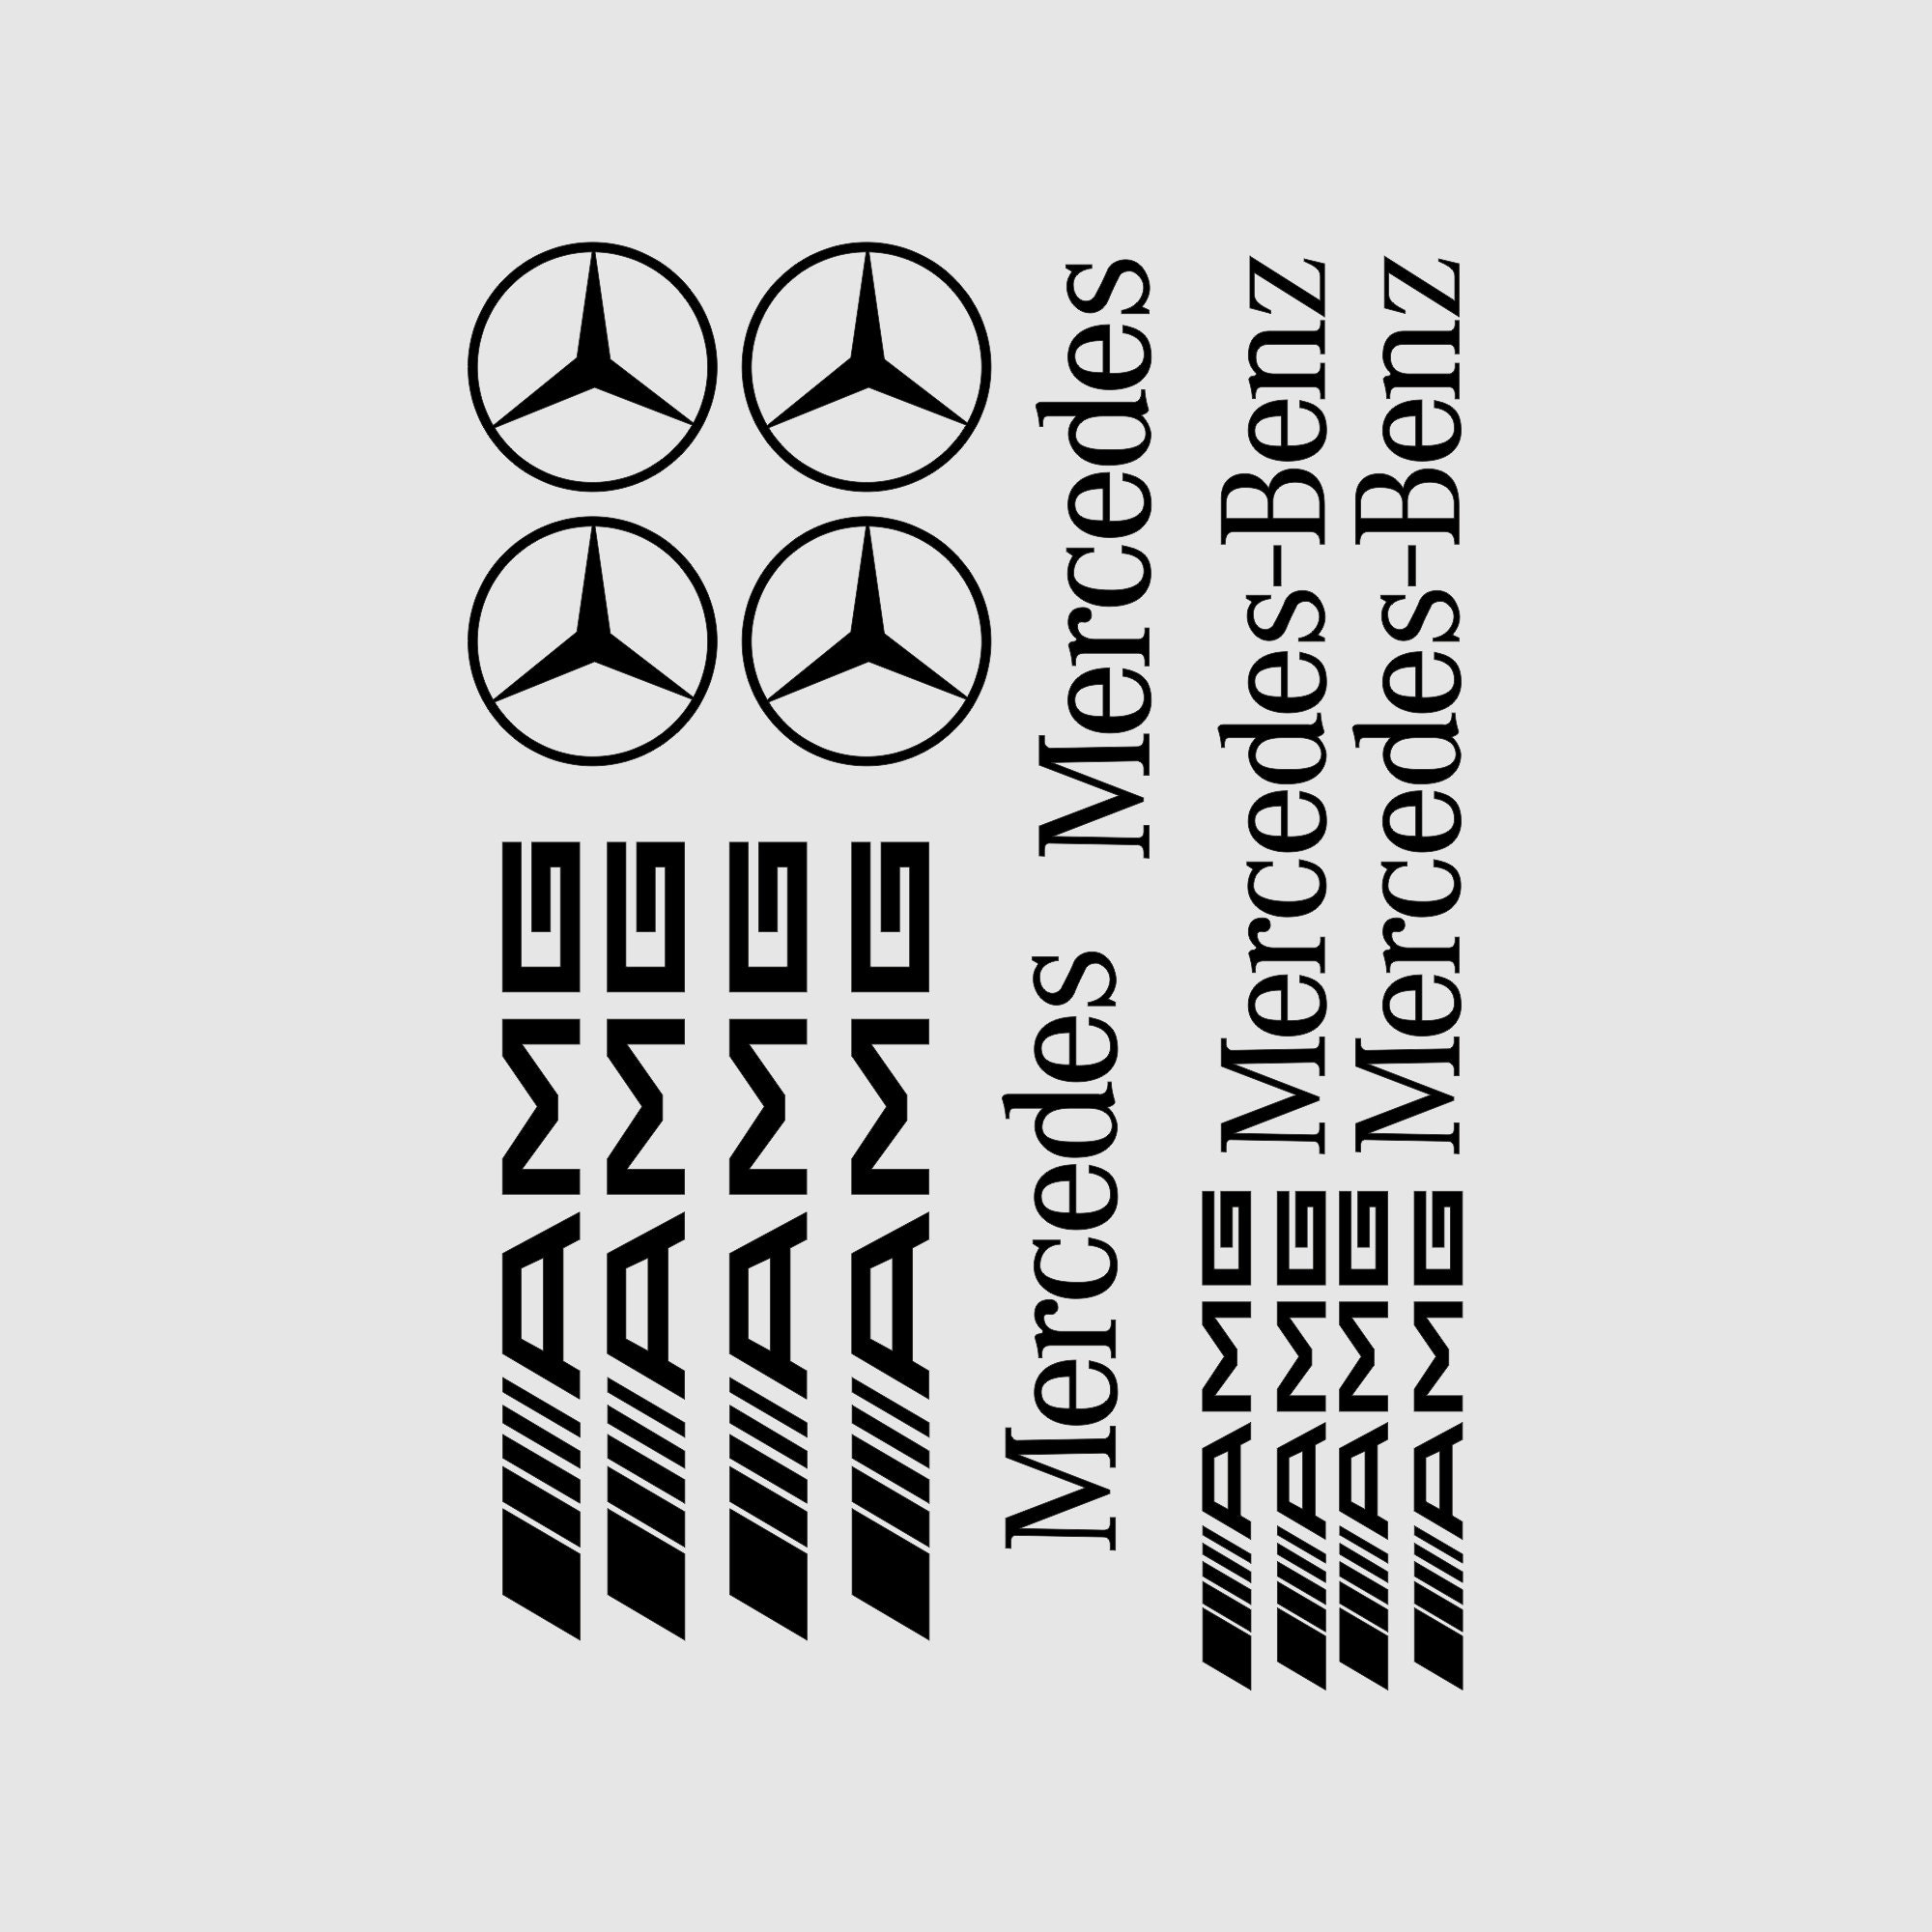 Buy Amg Sticker Online In India -  India